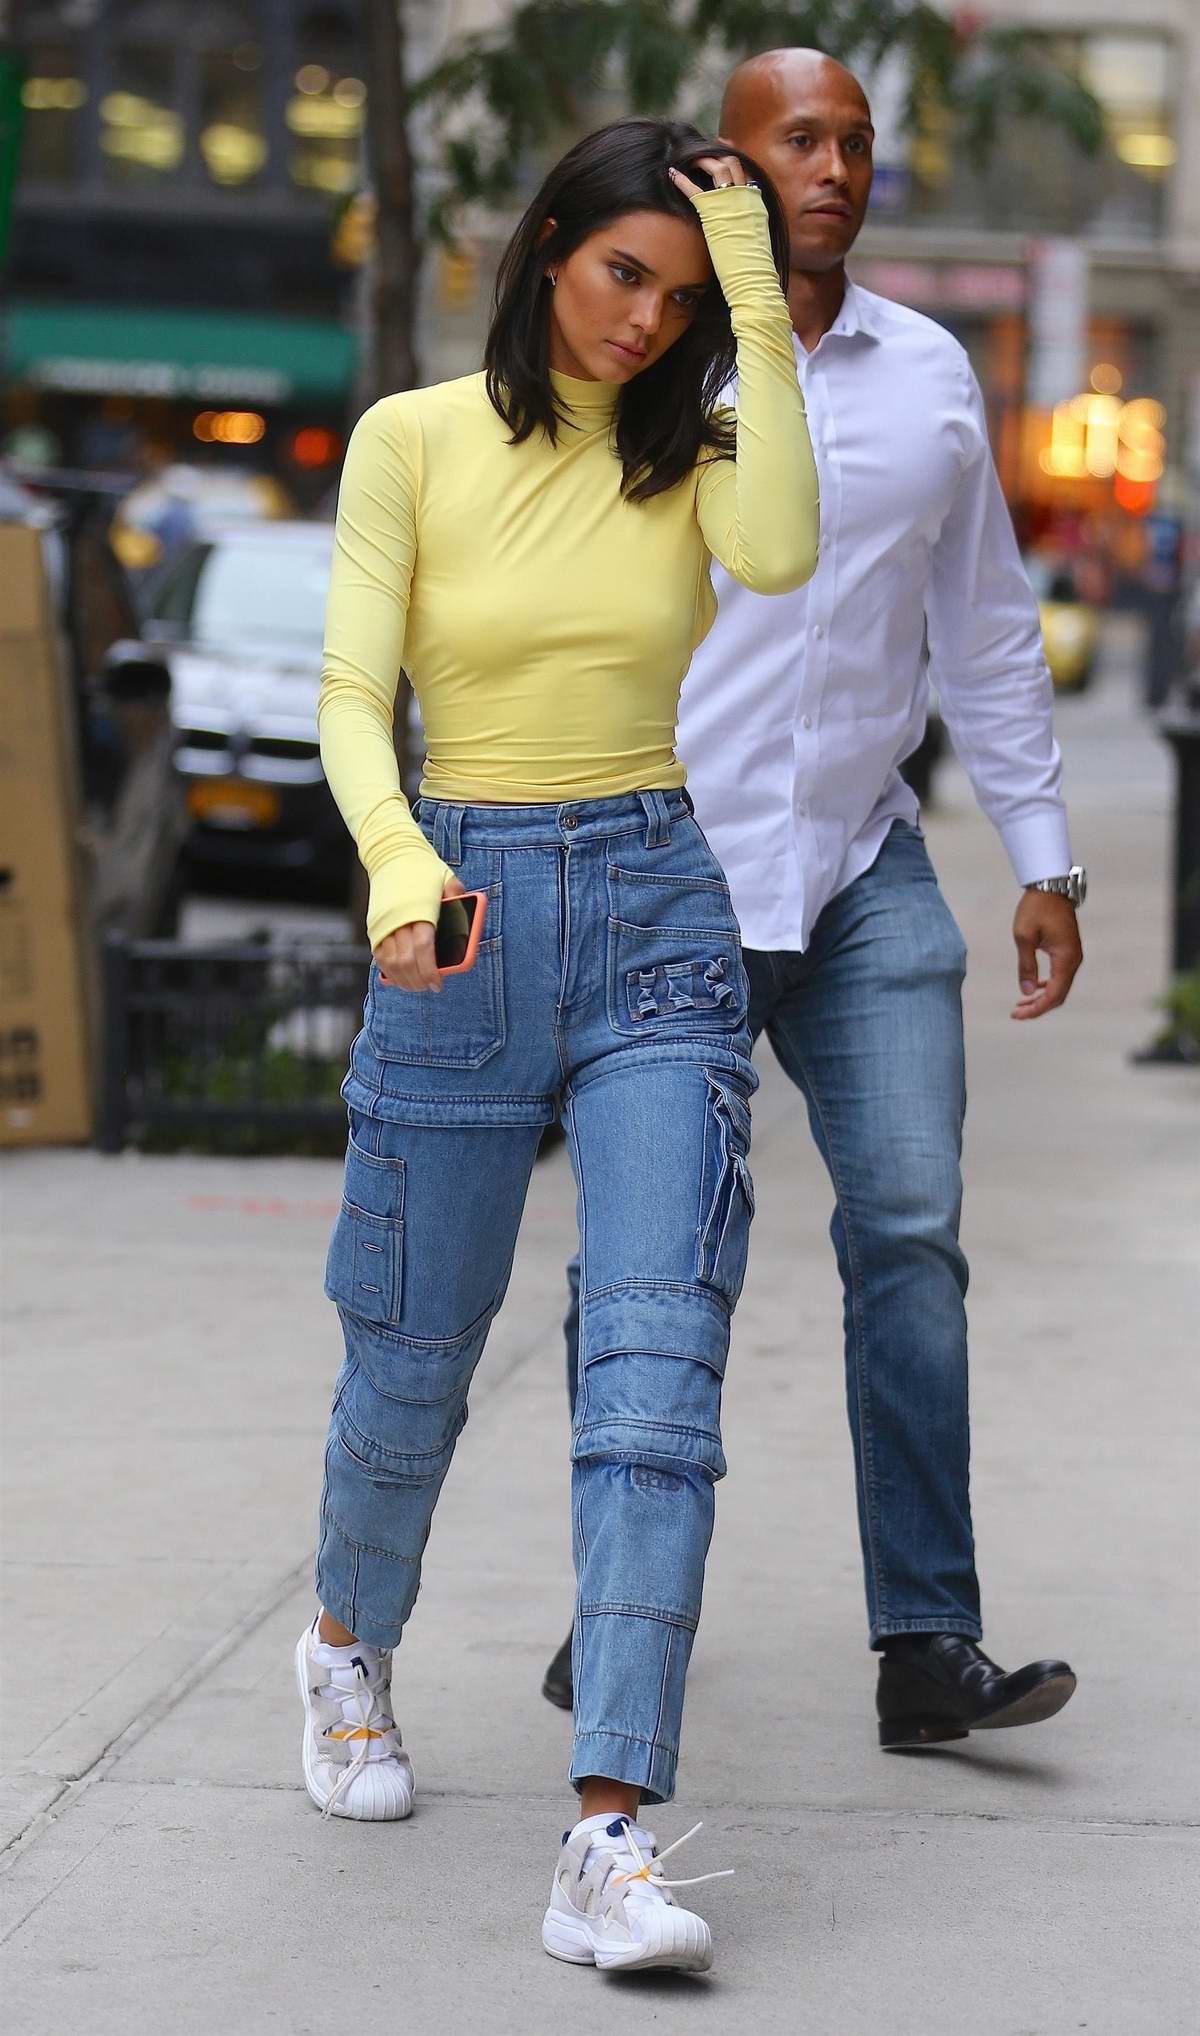 https://www.celebsfirst.com/wp-content/uploads/2018/09/kendall-jenner-seen-wearing-a-neon-top-with-high-waisted-jeans-and-sneakers-as-she-leaves-bar-pitti-in-new-york-city-080918_9.jpg